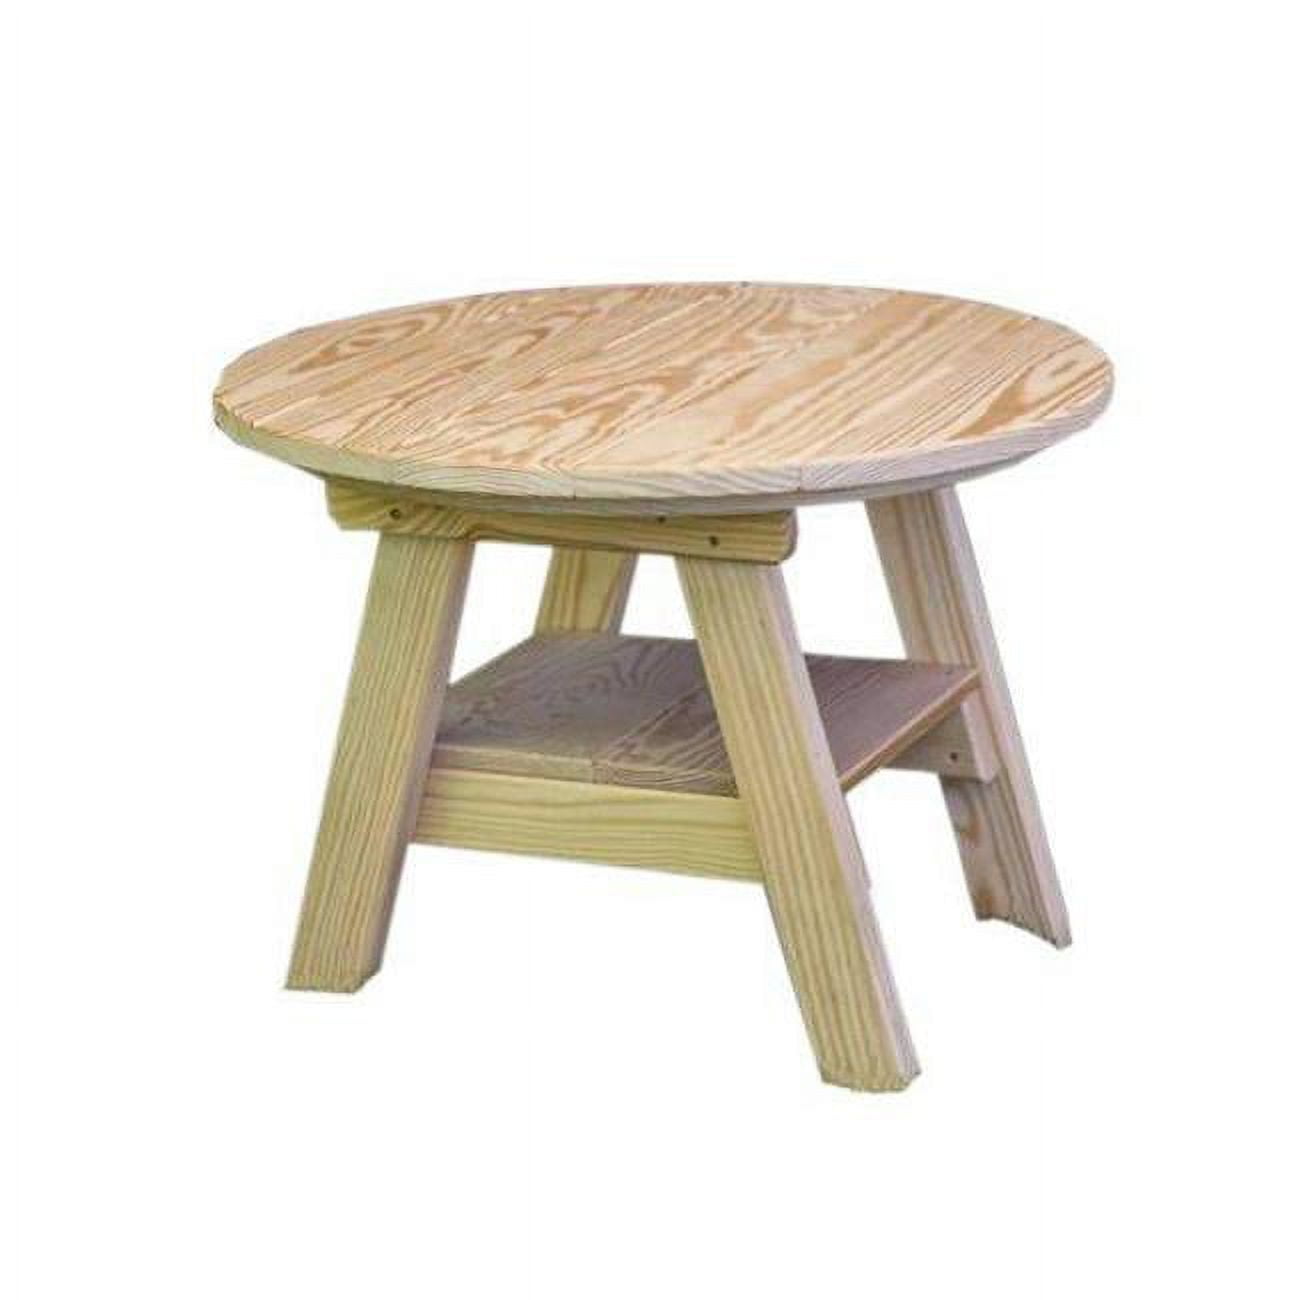 Fct27rcvd Treated Pine Round Table